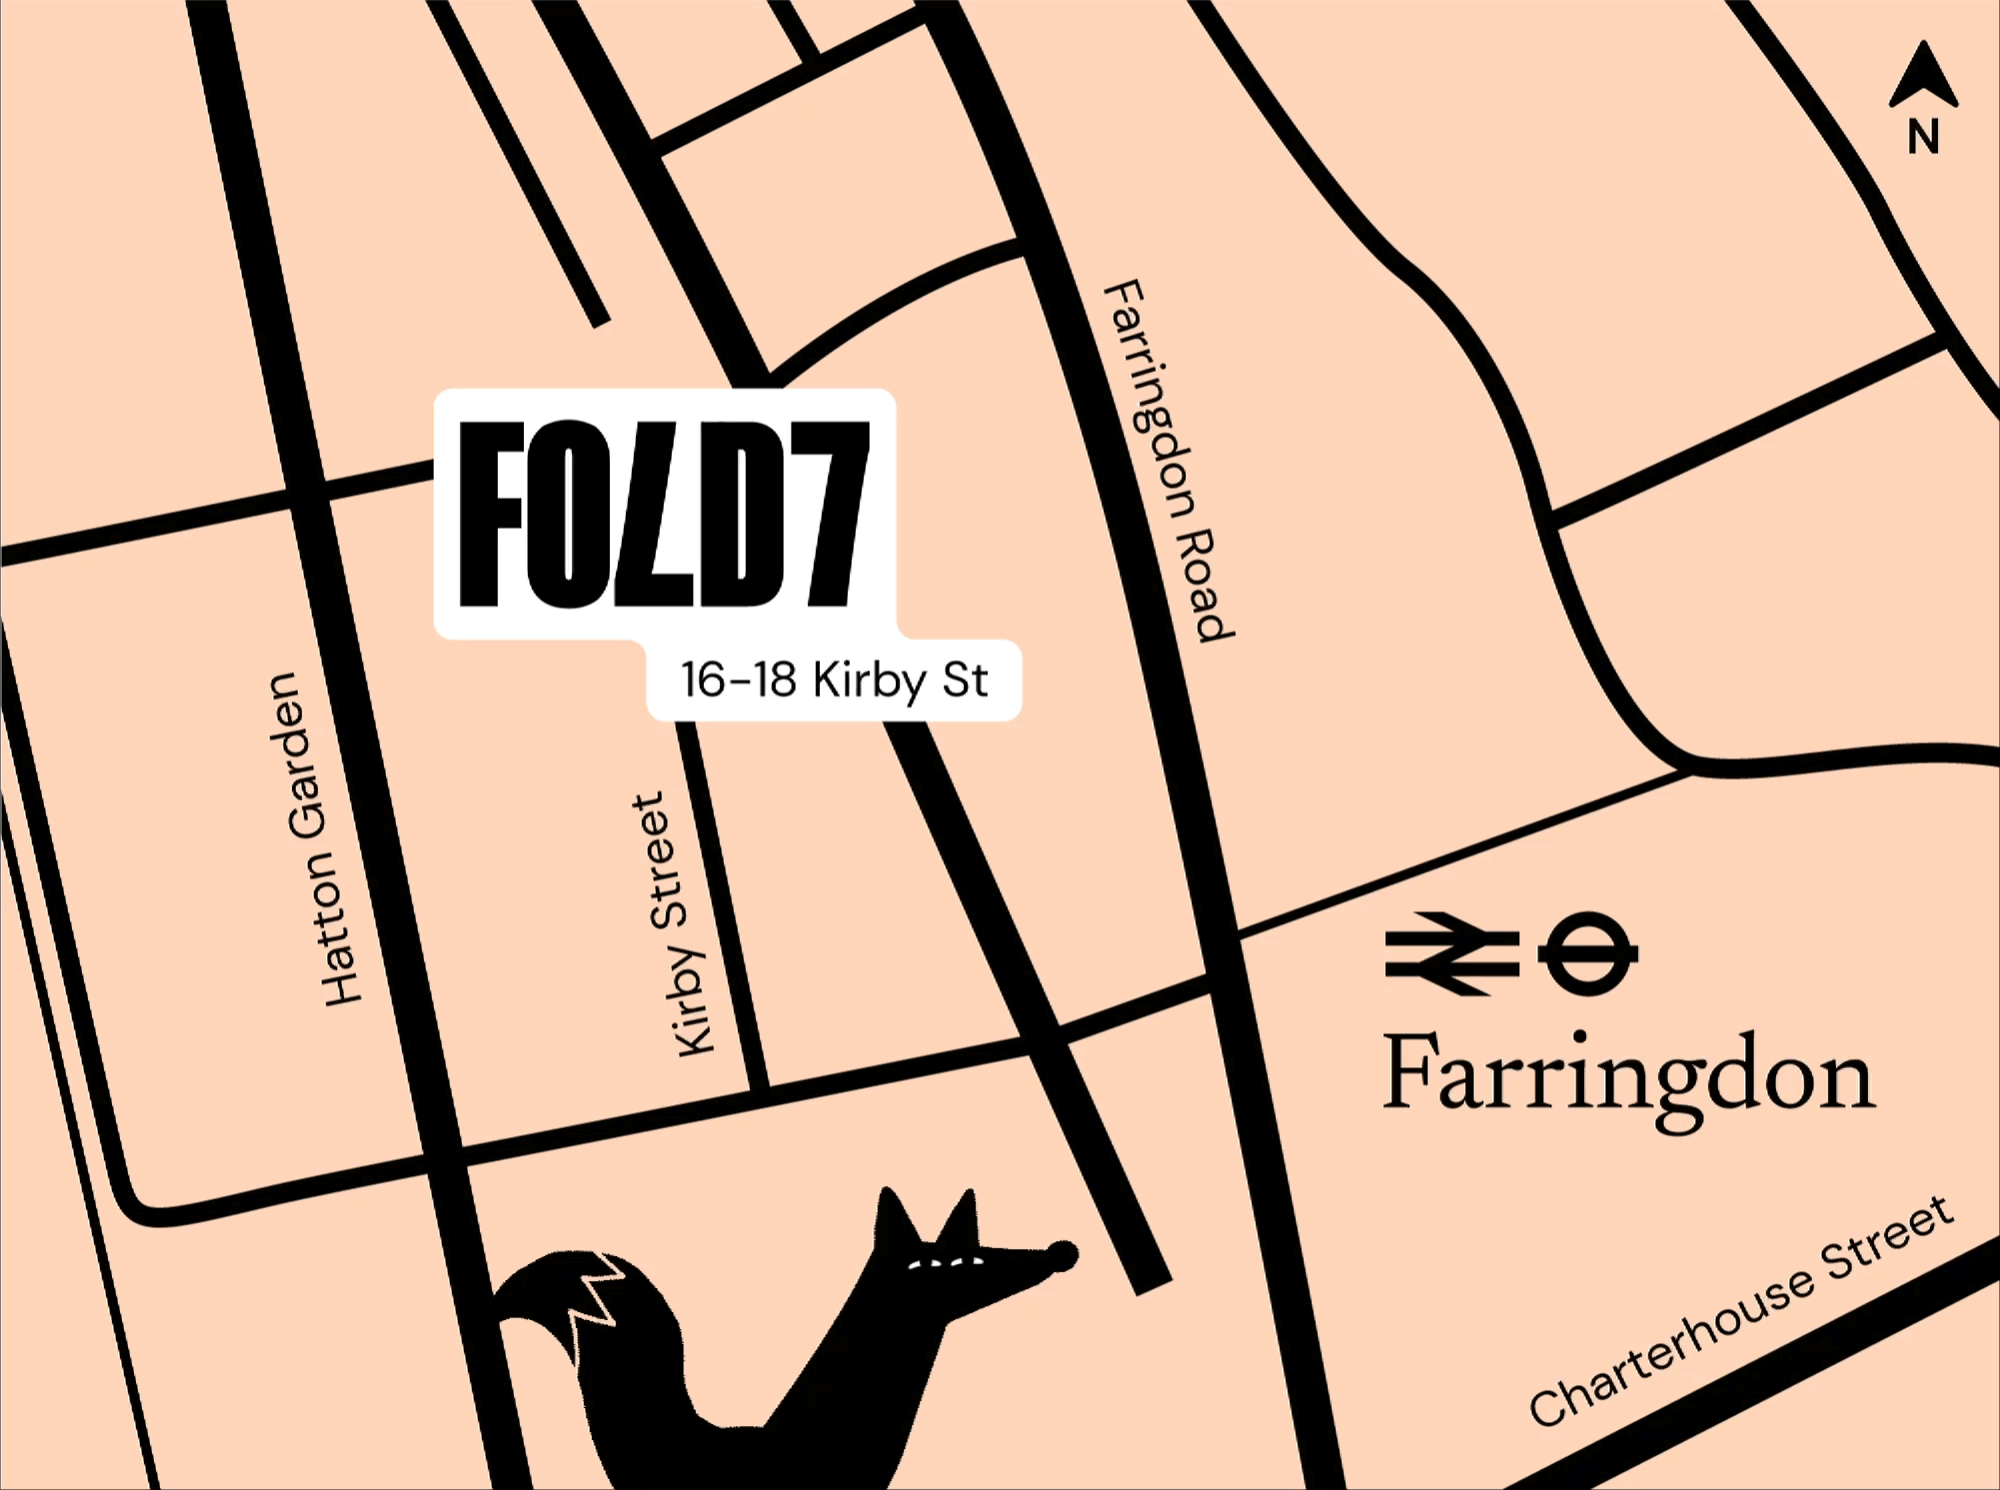 Fold7 office location in Farringdon London, and our playful fox mascot